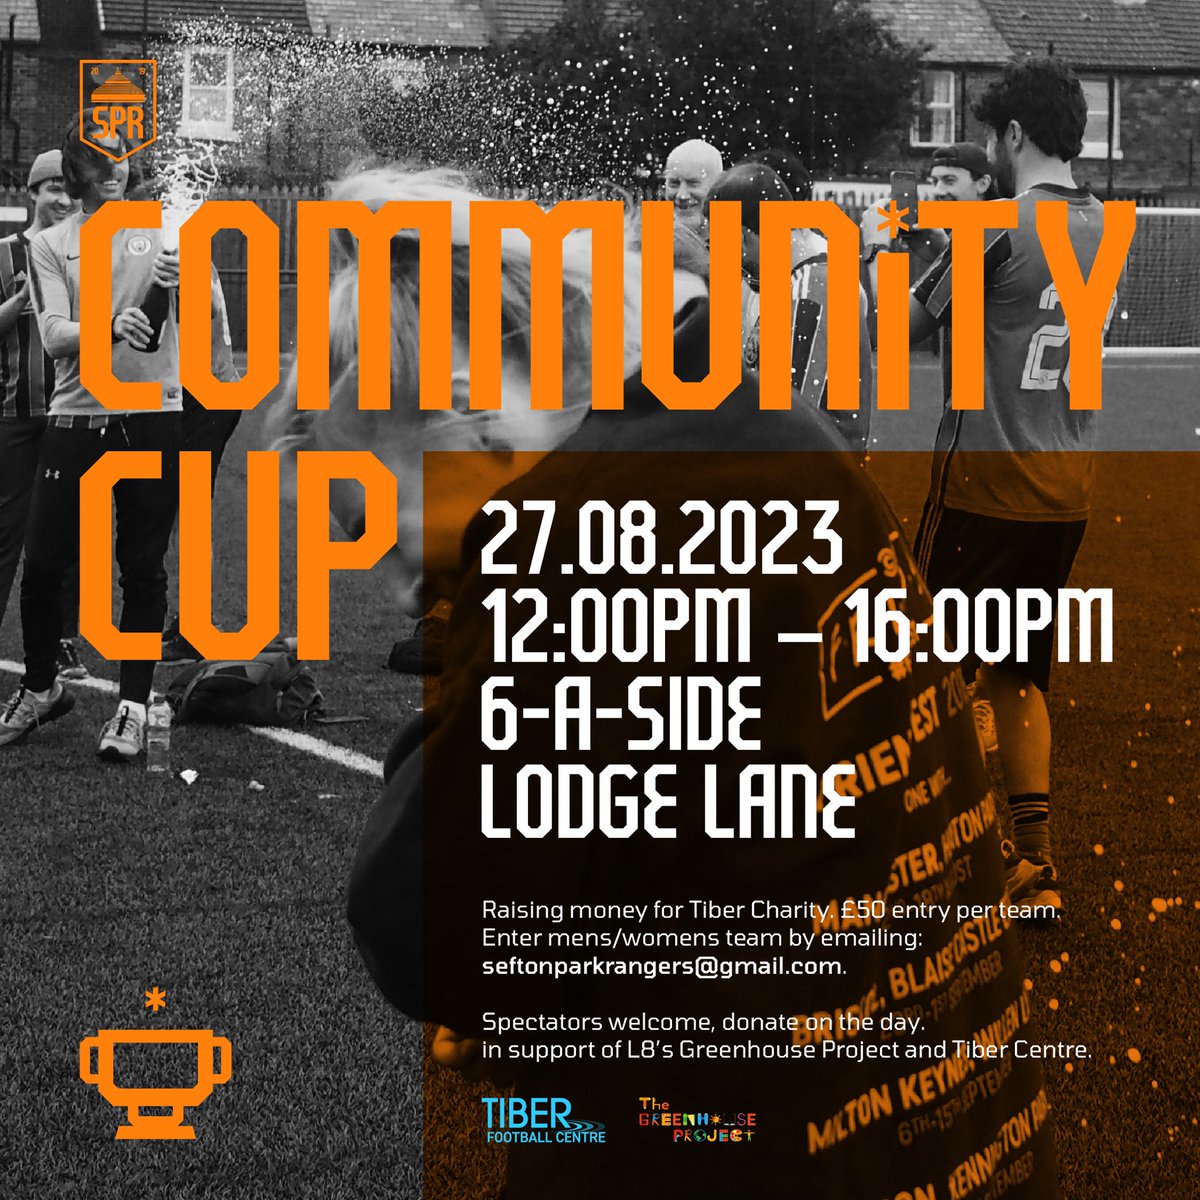 The SPR community cup will be talking place on 27.08.23

We run the 6aside community cup In support of the Greenhouse project and Tiber charities existing to benefit the children of the local L8 community. 

Drop us a DM or email seftonparkrangersfc@gmail.com to enter a team ✌🏻🍊